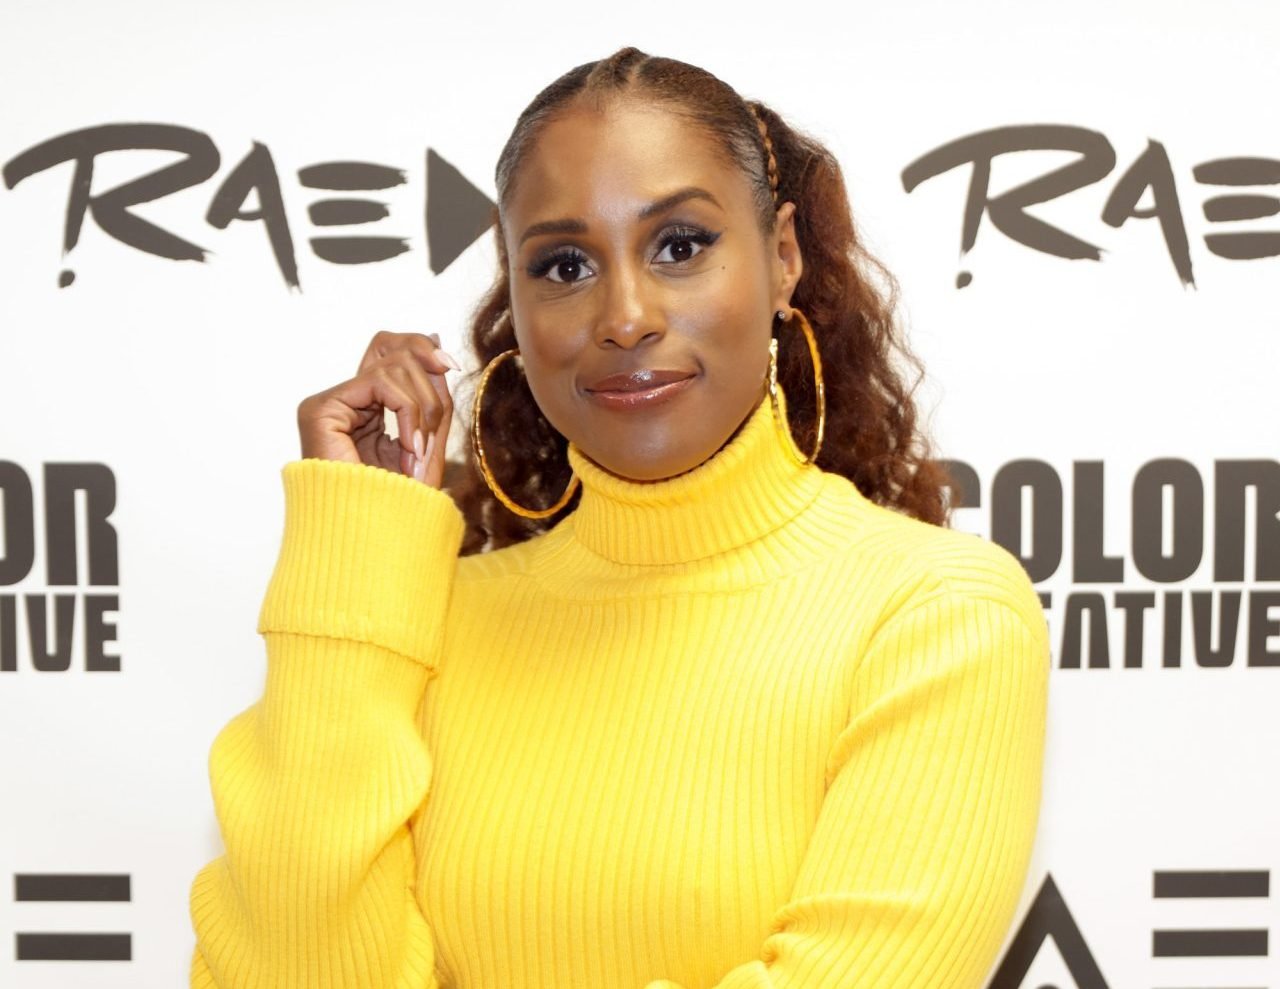 Issa Rae Asks Twitter To Let Her “Delight in, Drink And Be Merry” After Shutting Down Being pregnant Rumors